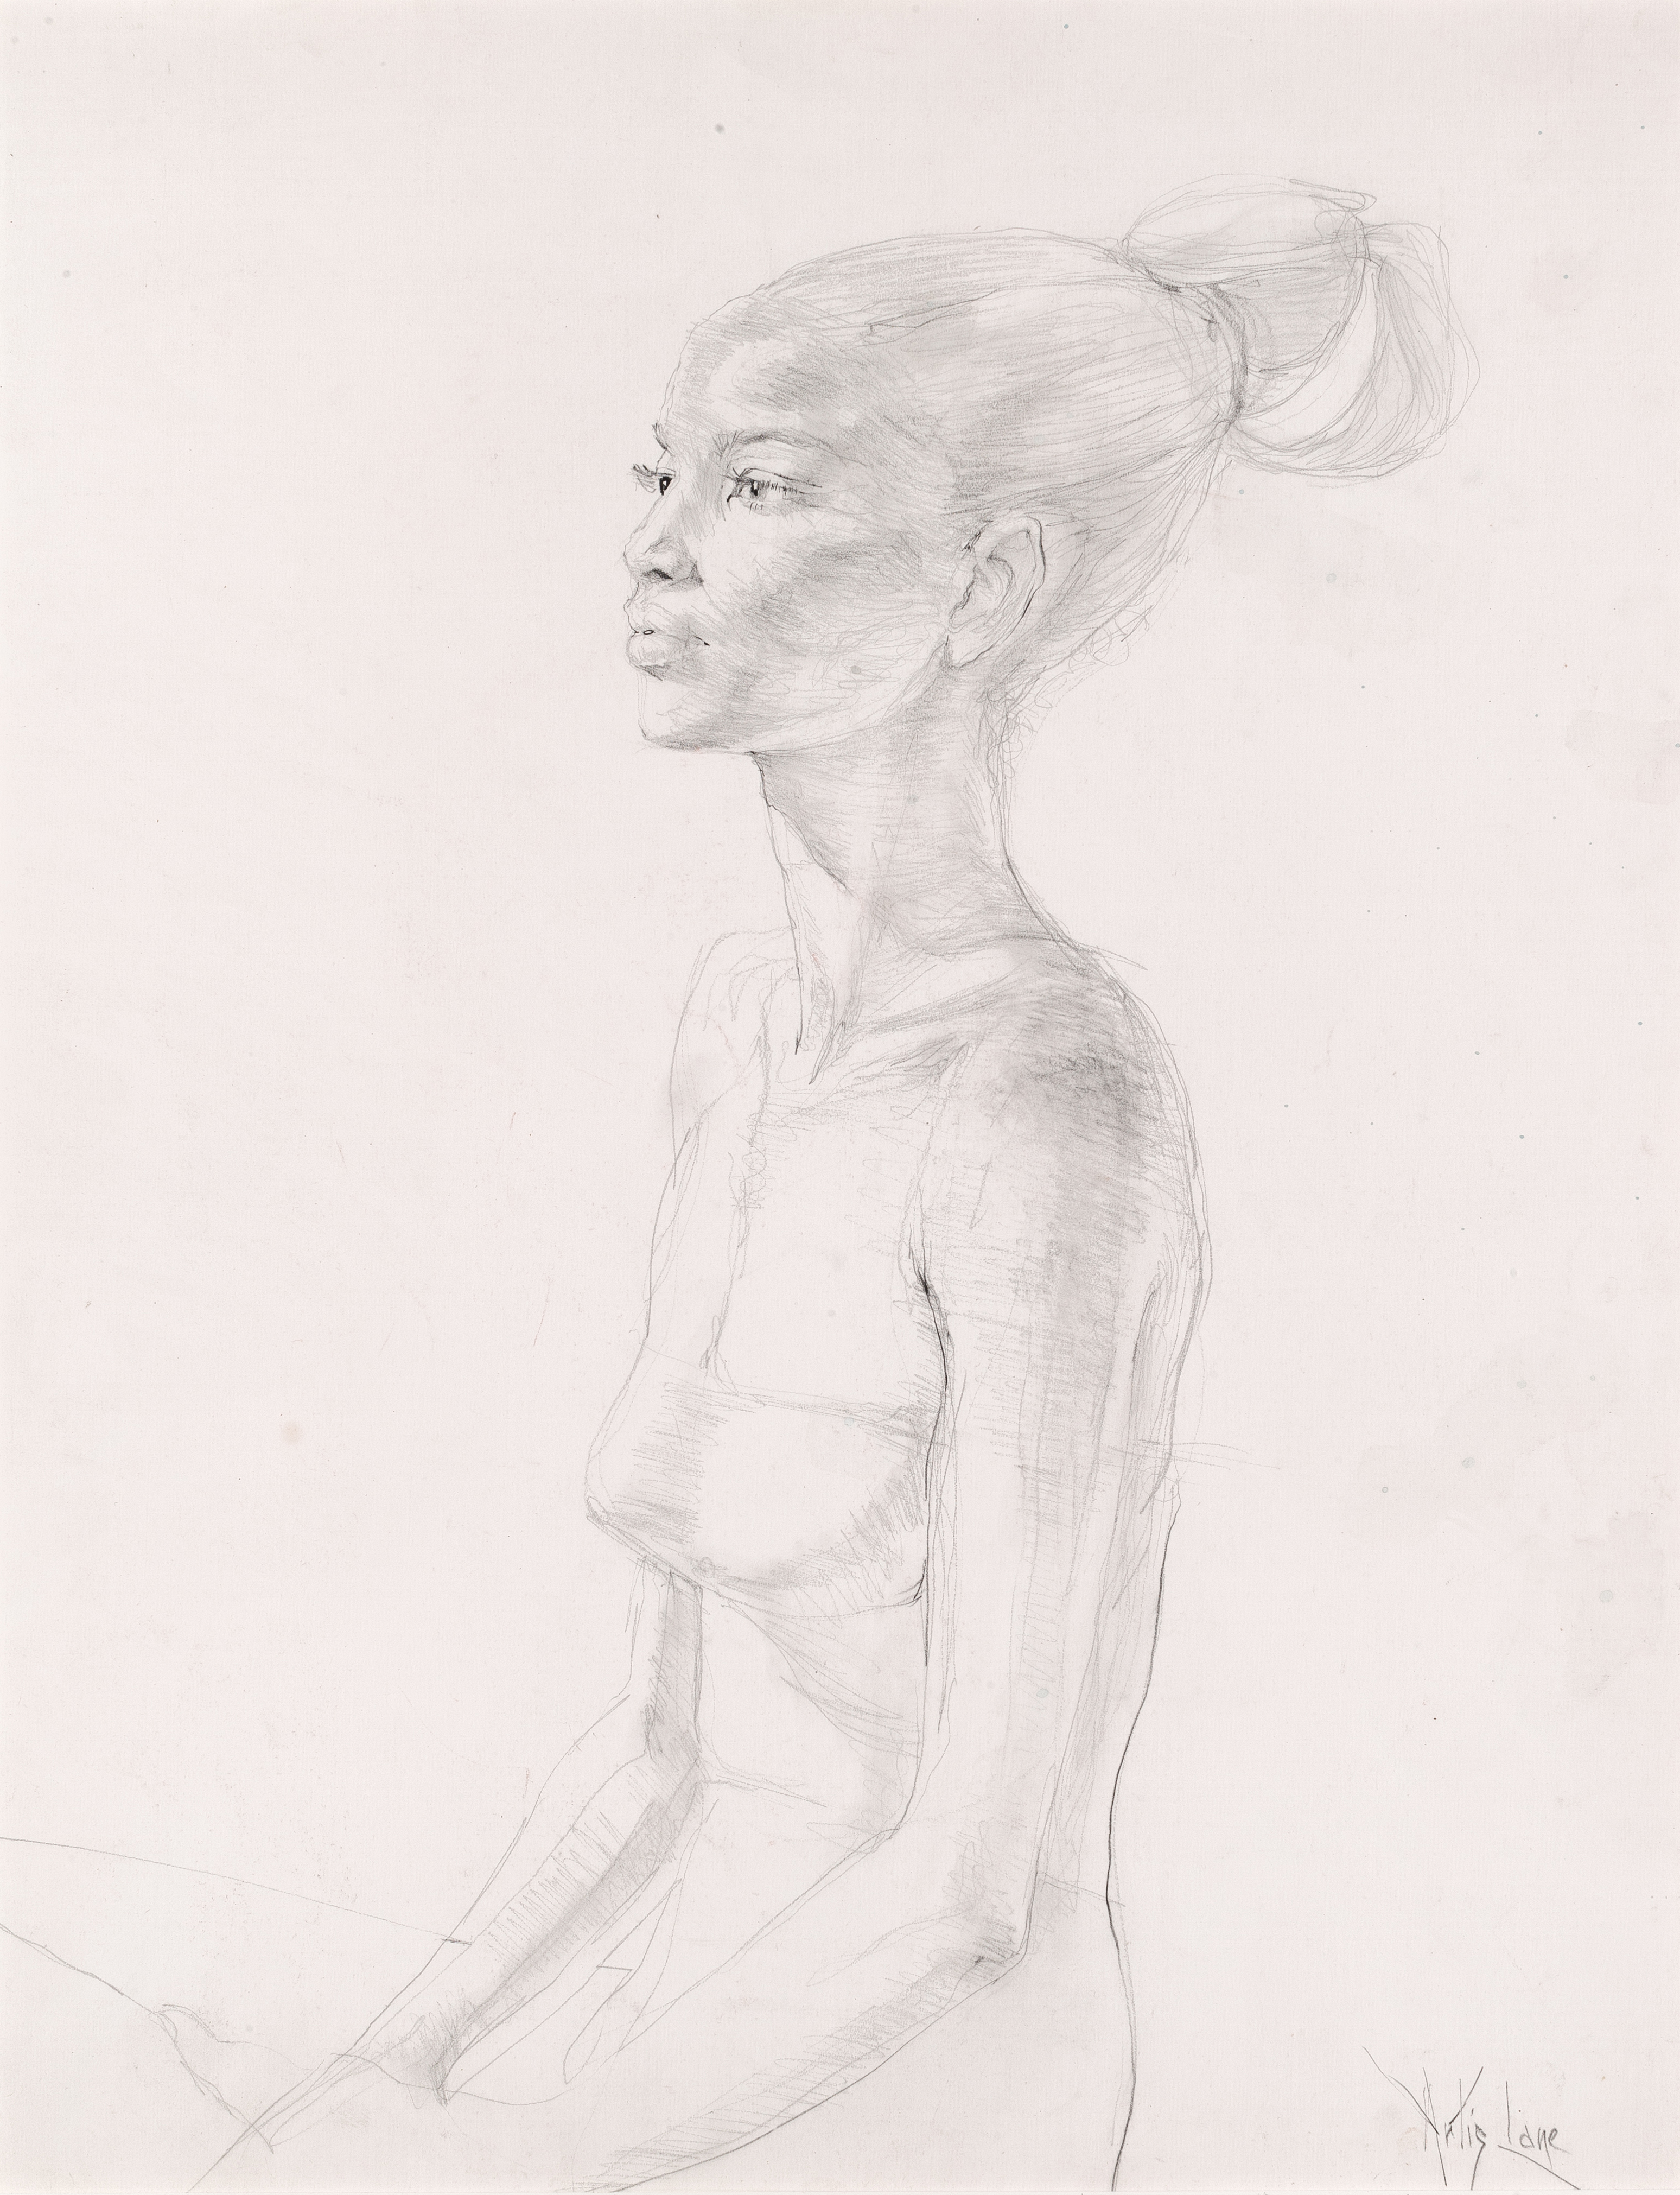 PFF225-Artis Lane, Young Woman, Pencil, 1985. Portrait of young woman in profile.